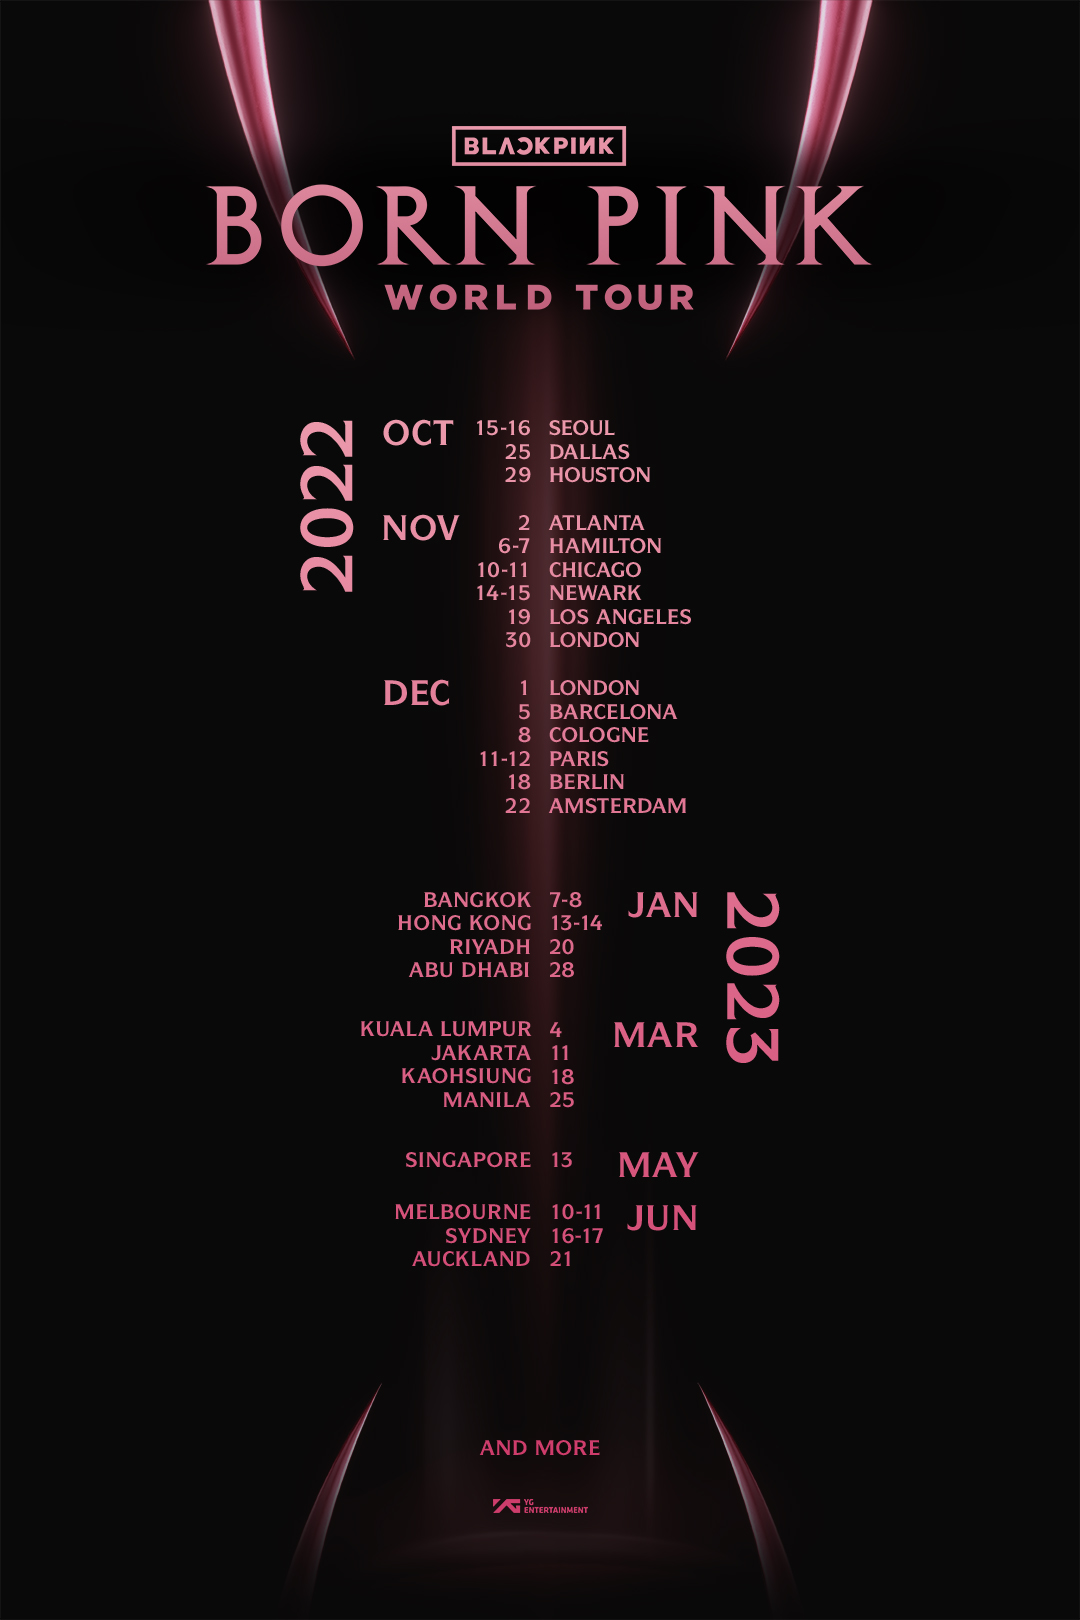 BLACKPINK Drops Dates And Cities For "BORN PINK" World Tour